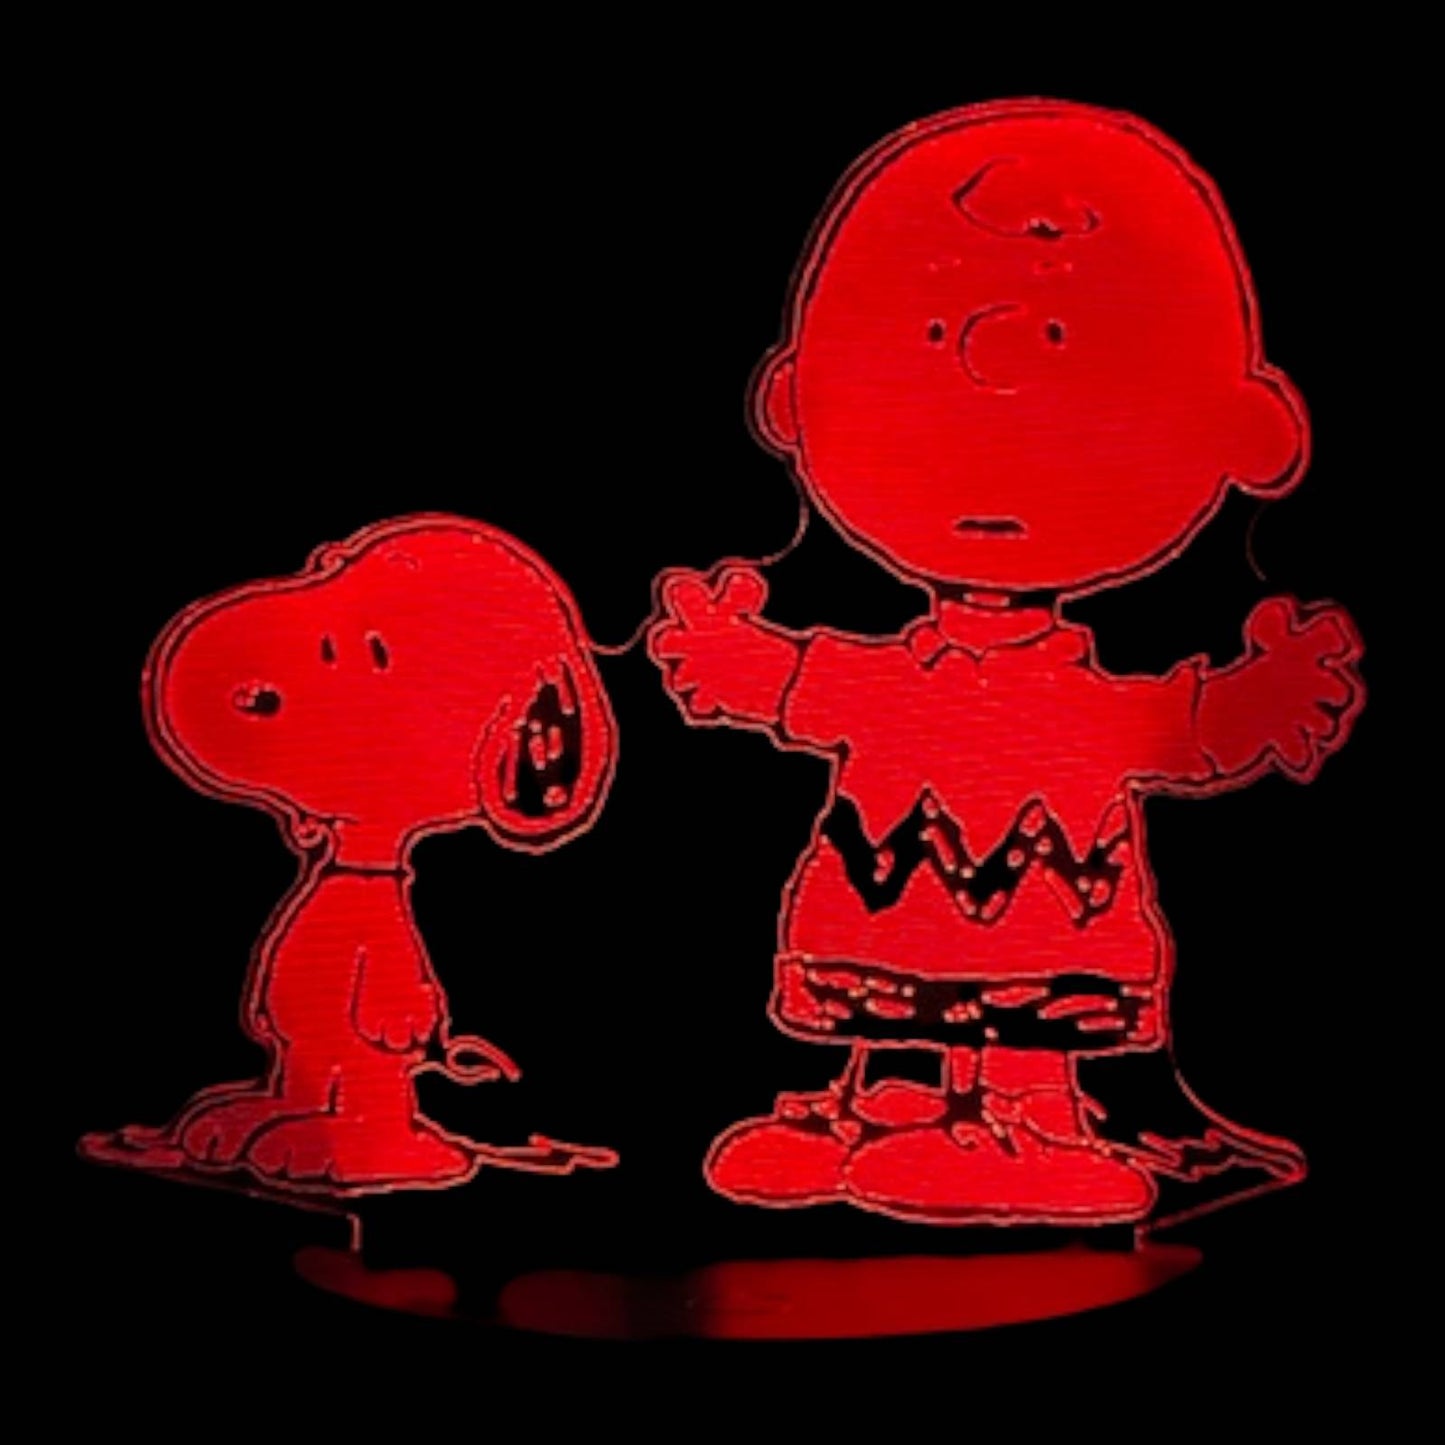 Charlie Brown & Snoopy 3D LED Night-Light 7 Color Changing Lamp w/ Touch Switch